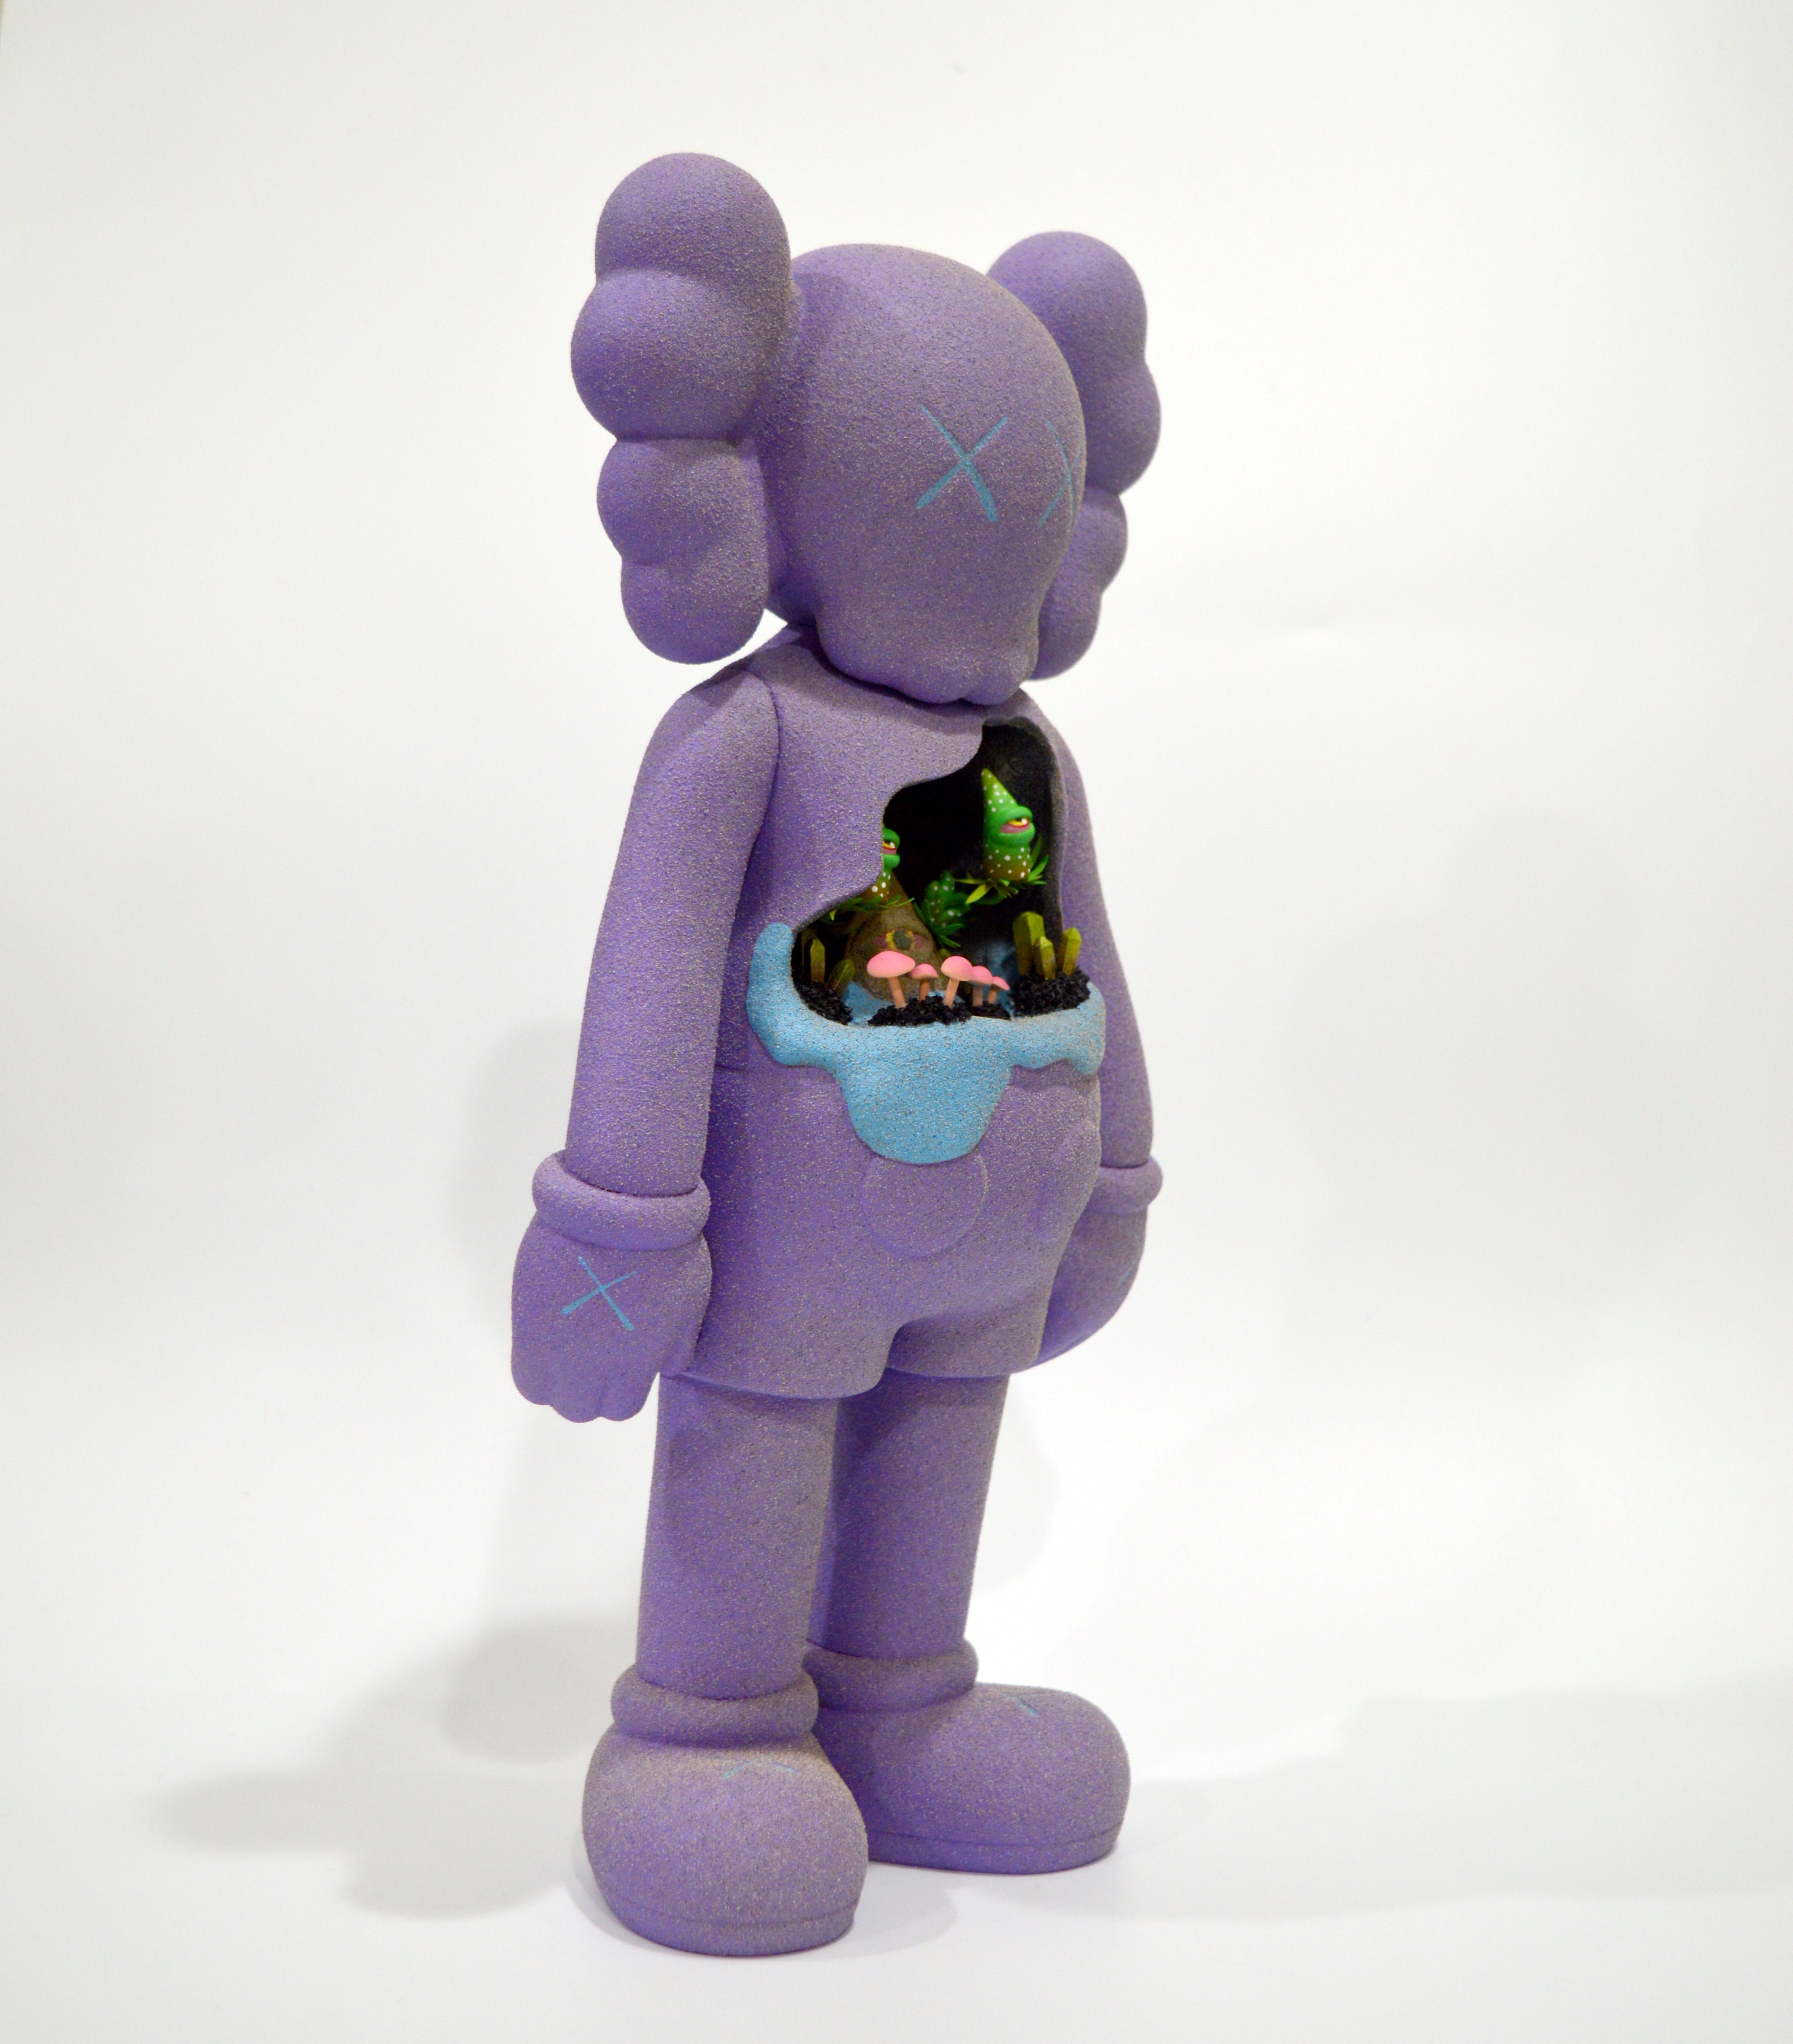 Misappropriated Icon 5 - "Moonrock Kaws" Stoned Eye Shrine Edition by Nugglife